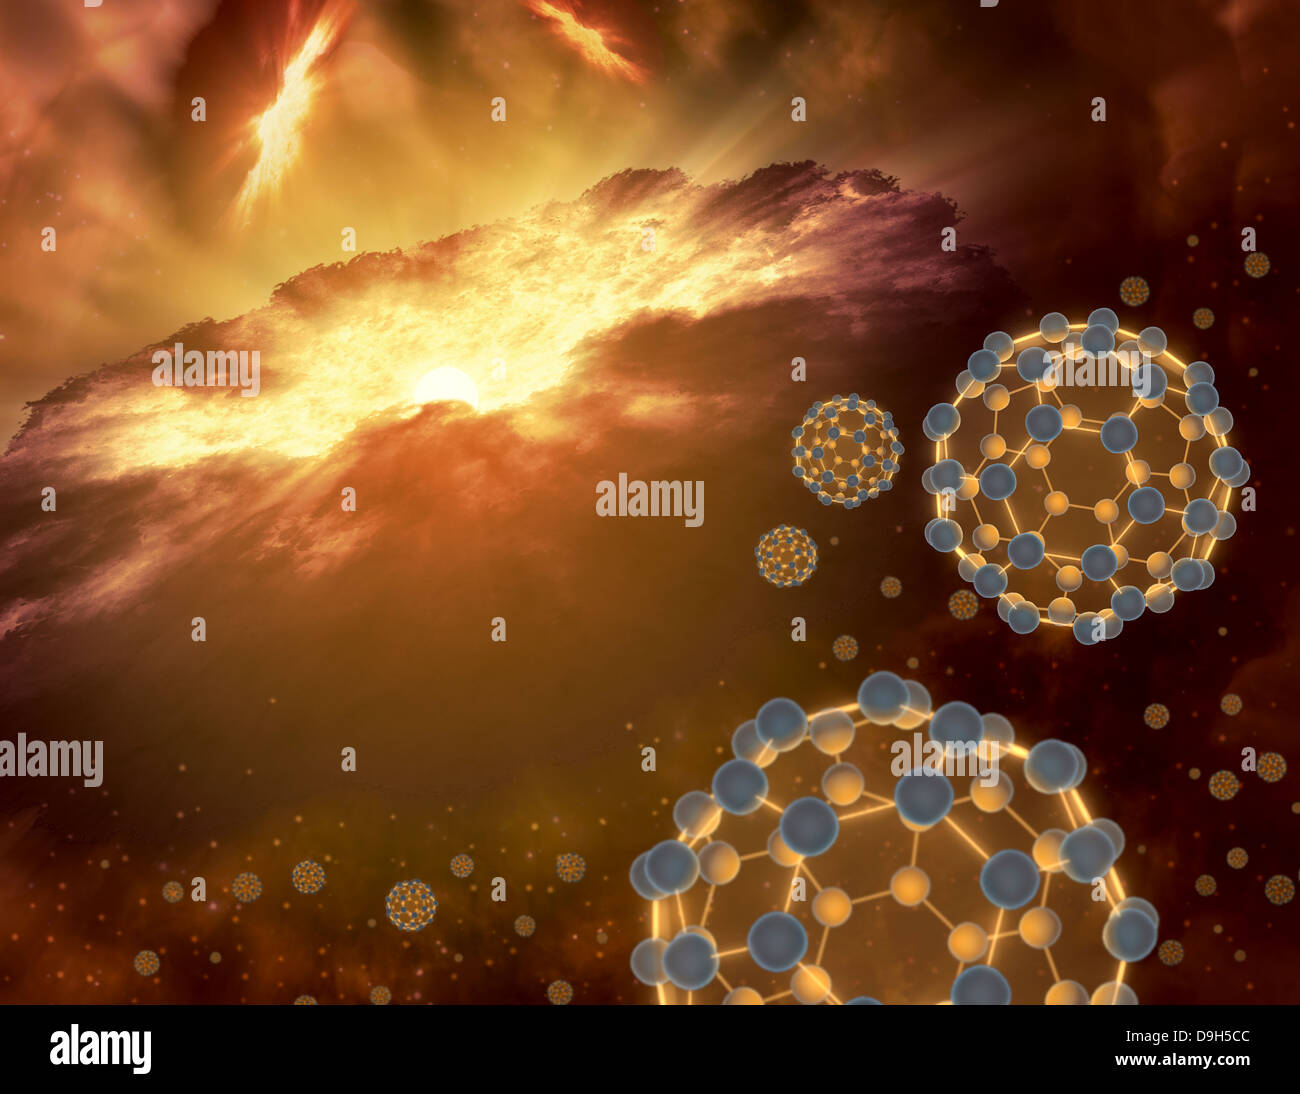 Buckyballs floating in interstellar space near a region of current star-formation. Stock Photo